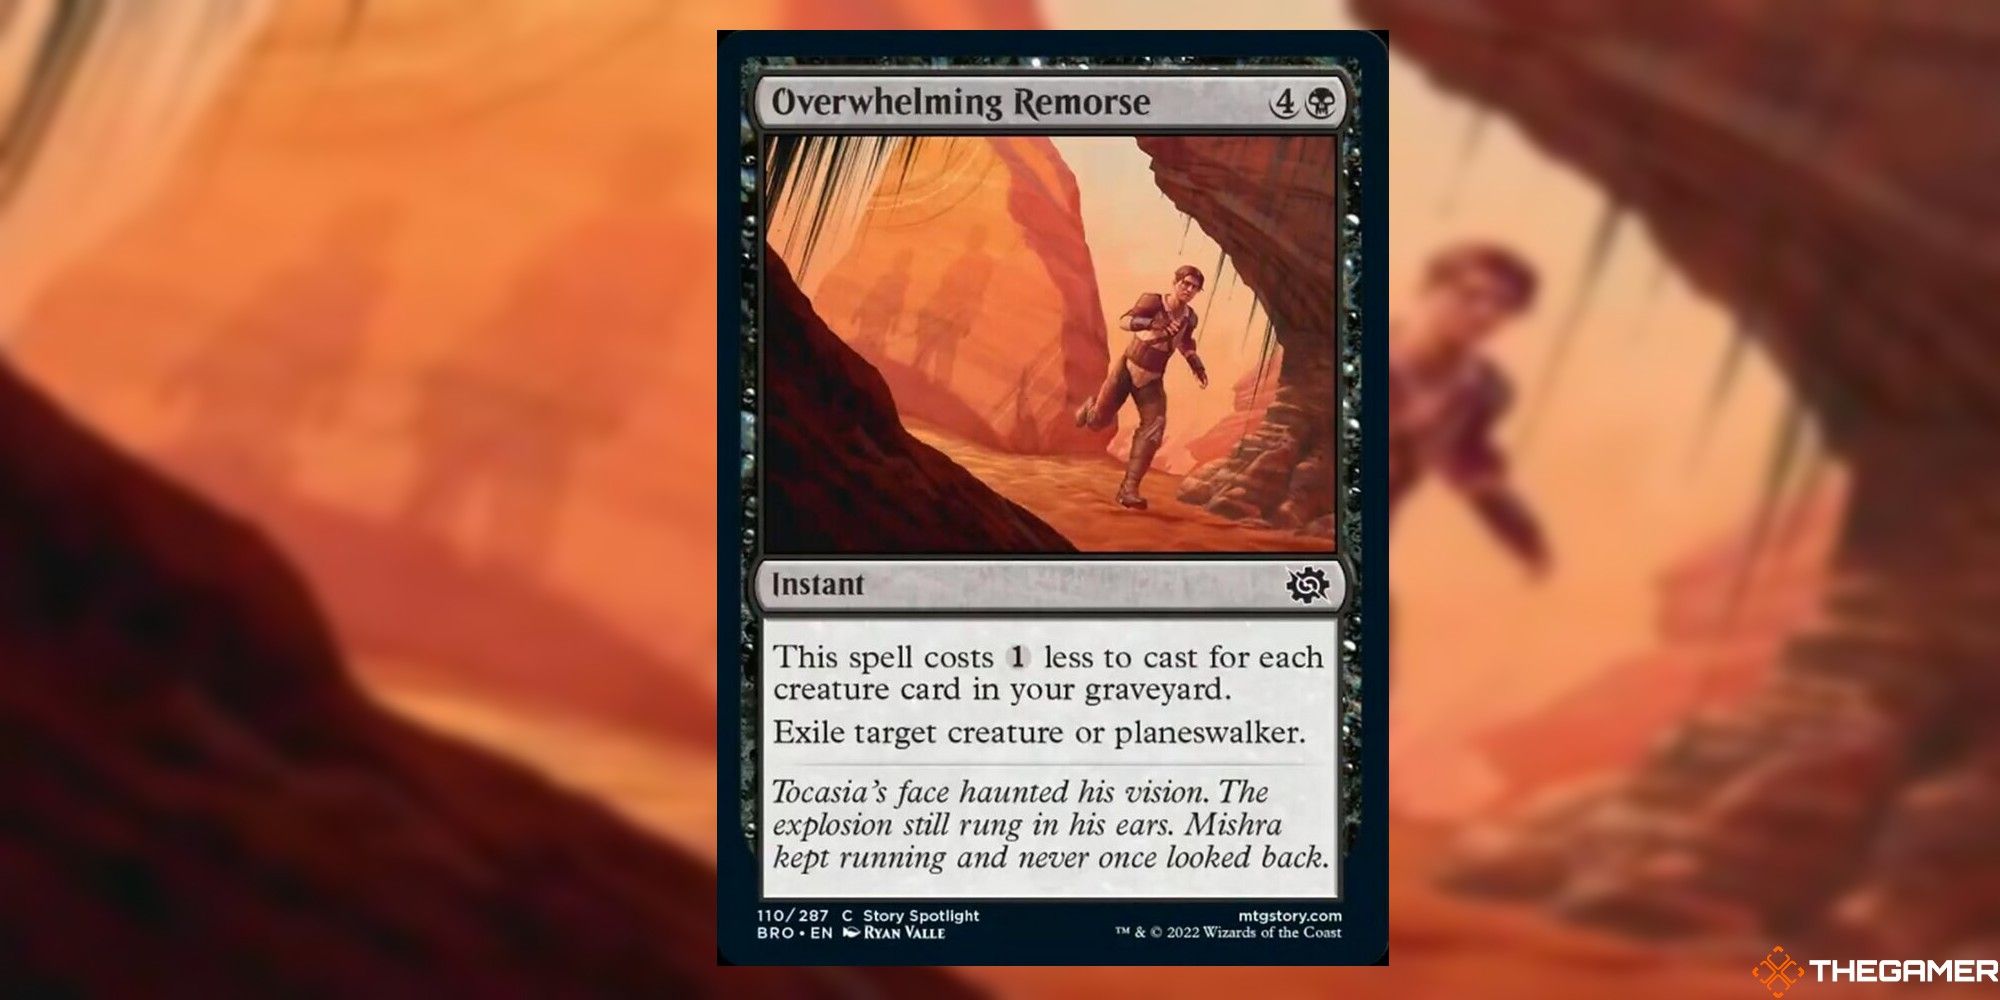 Overwhelming Remorse card and art background